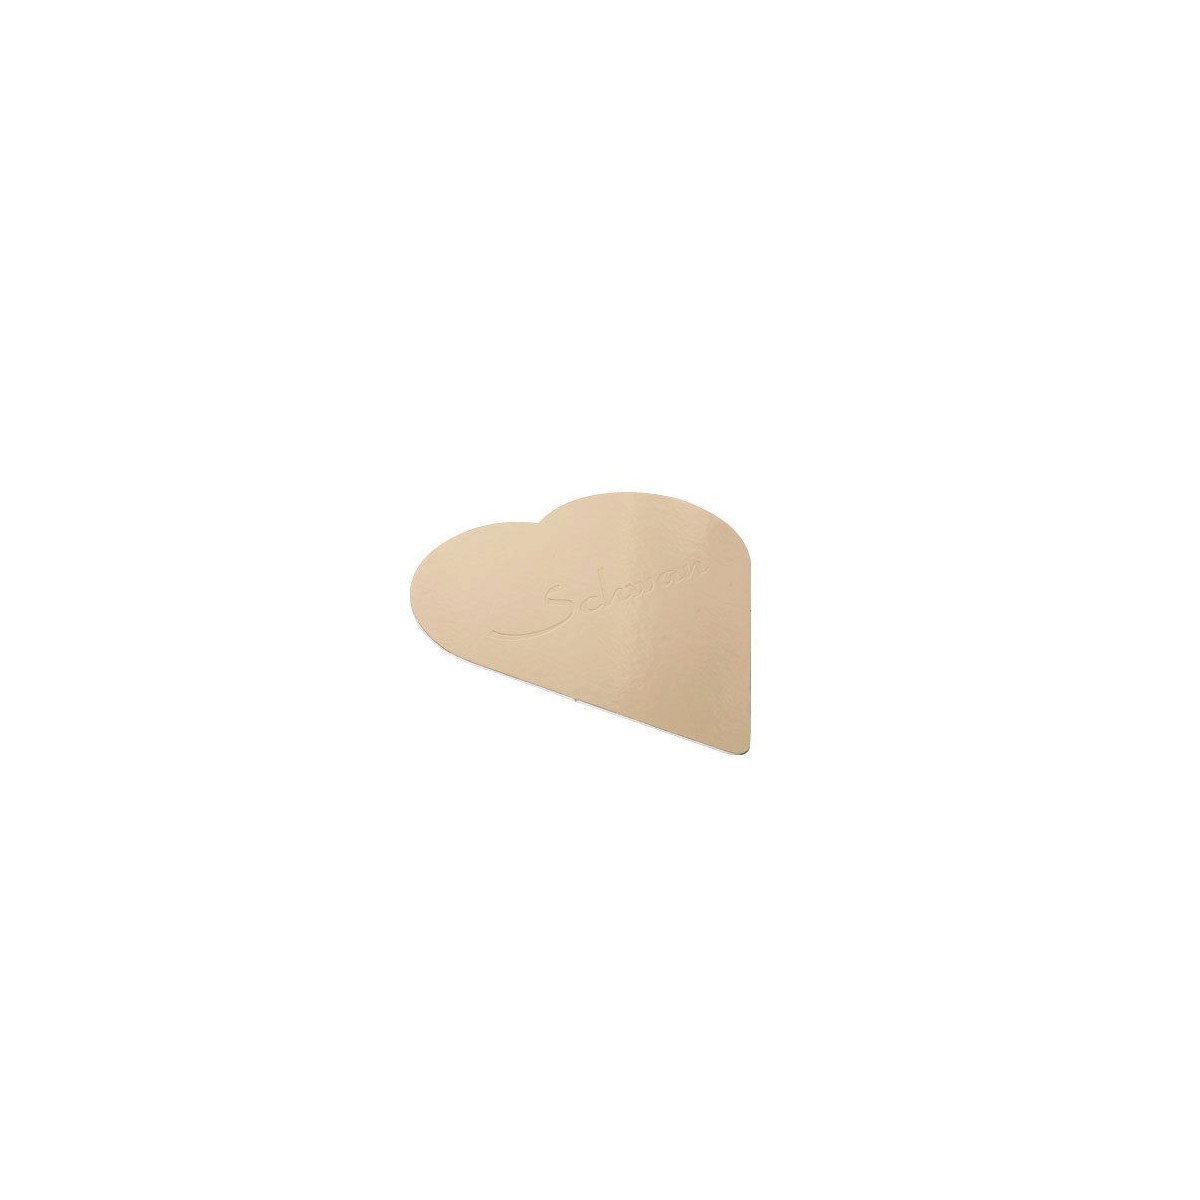 CAKE BOARD HEART GOLD 22 CM 25 PIECES FOSTPLUS INCLUDED  PACKAGE